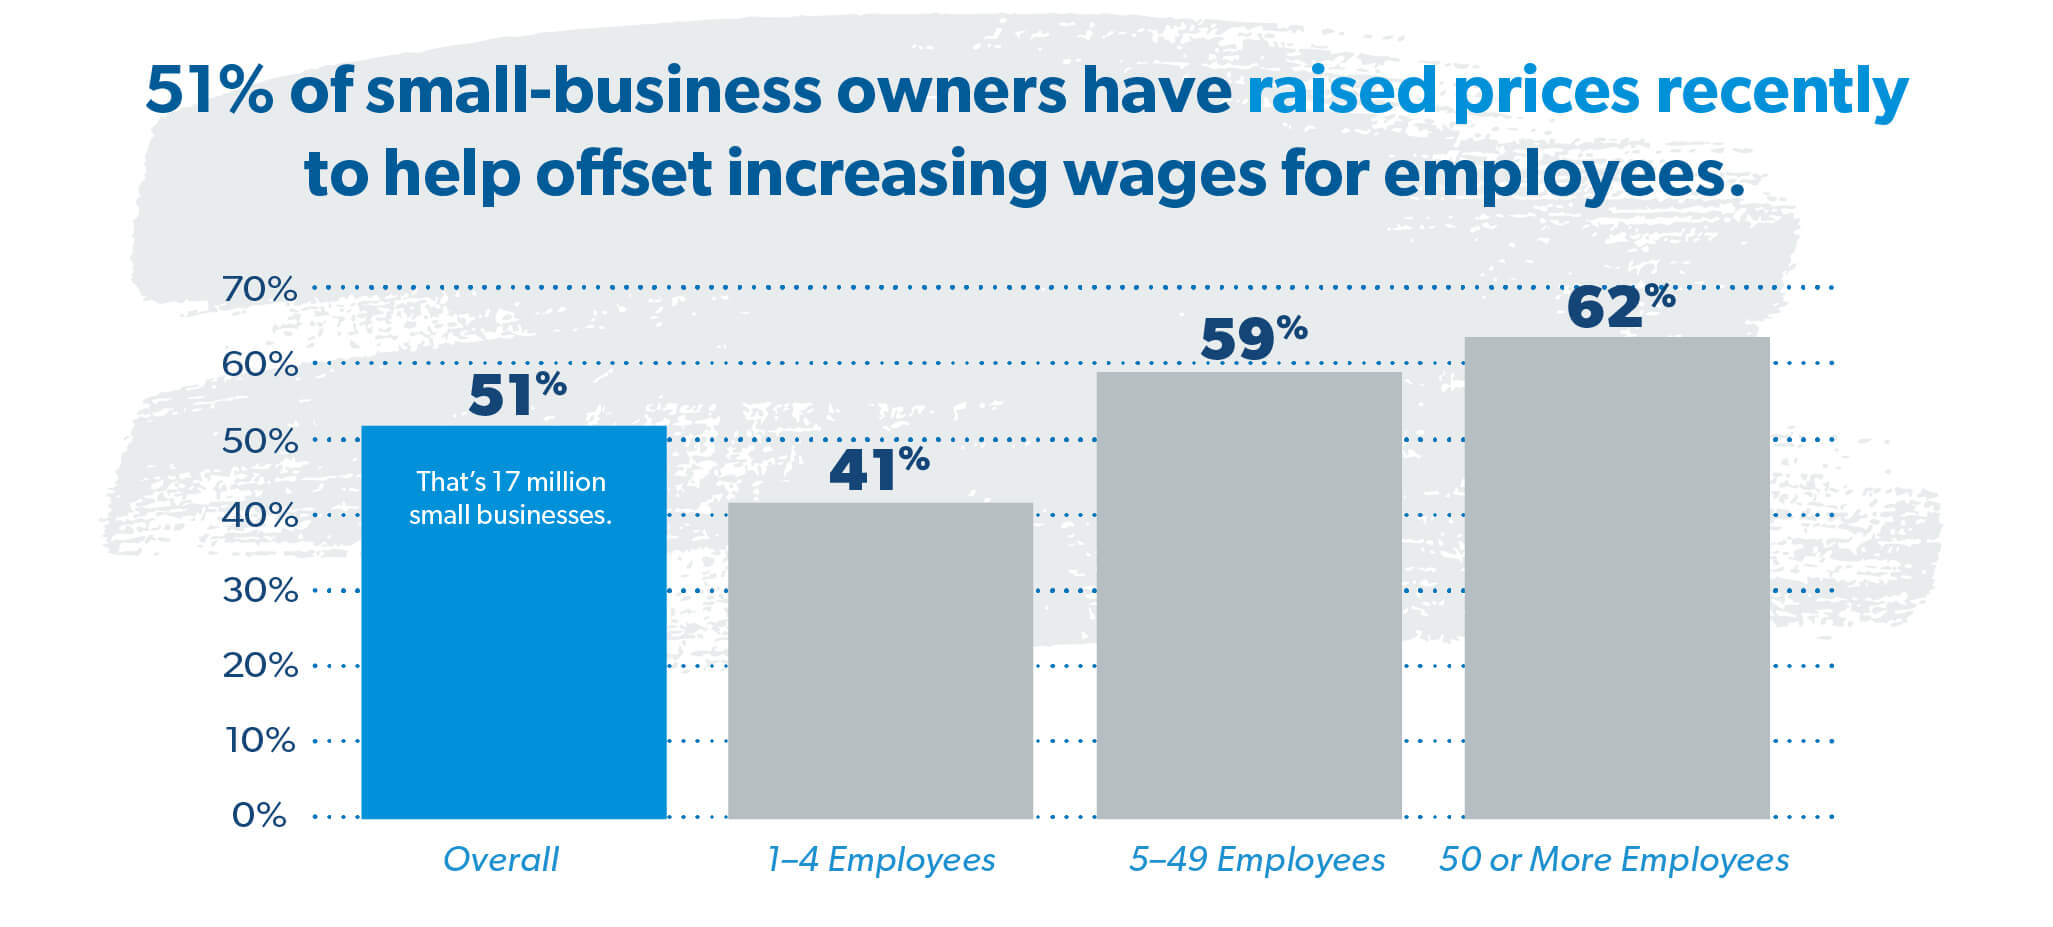 51% of small-business owners have raised prices recently to help offset increasing wages for employees